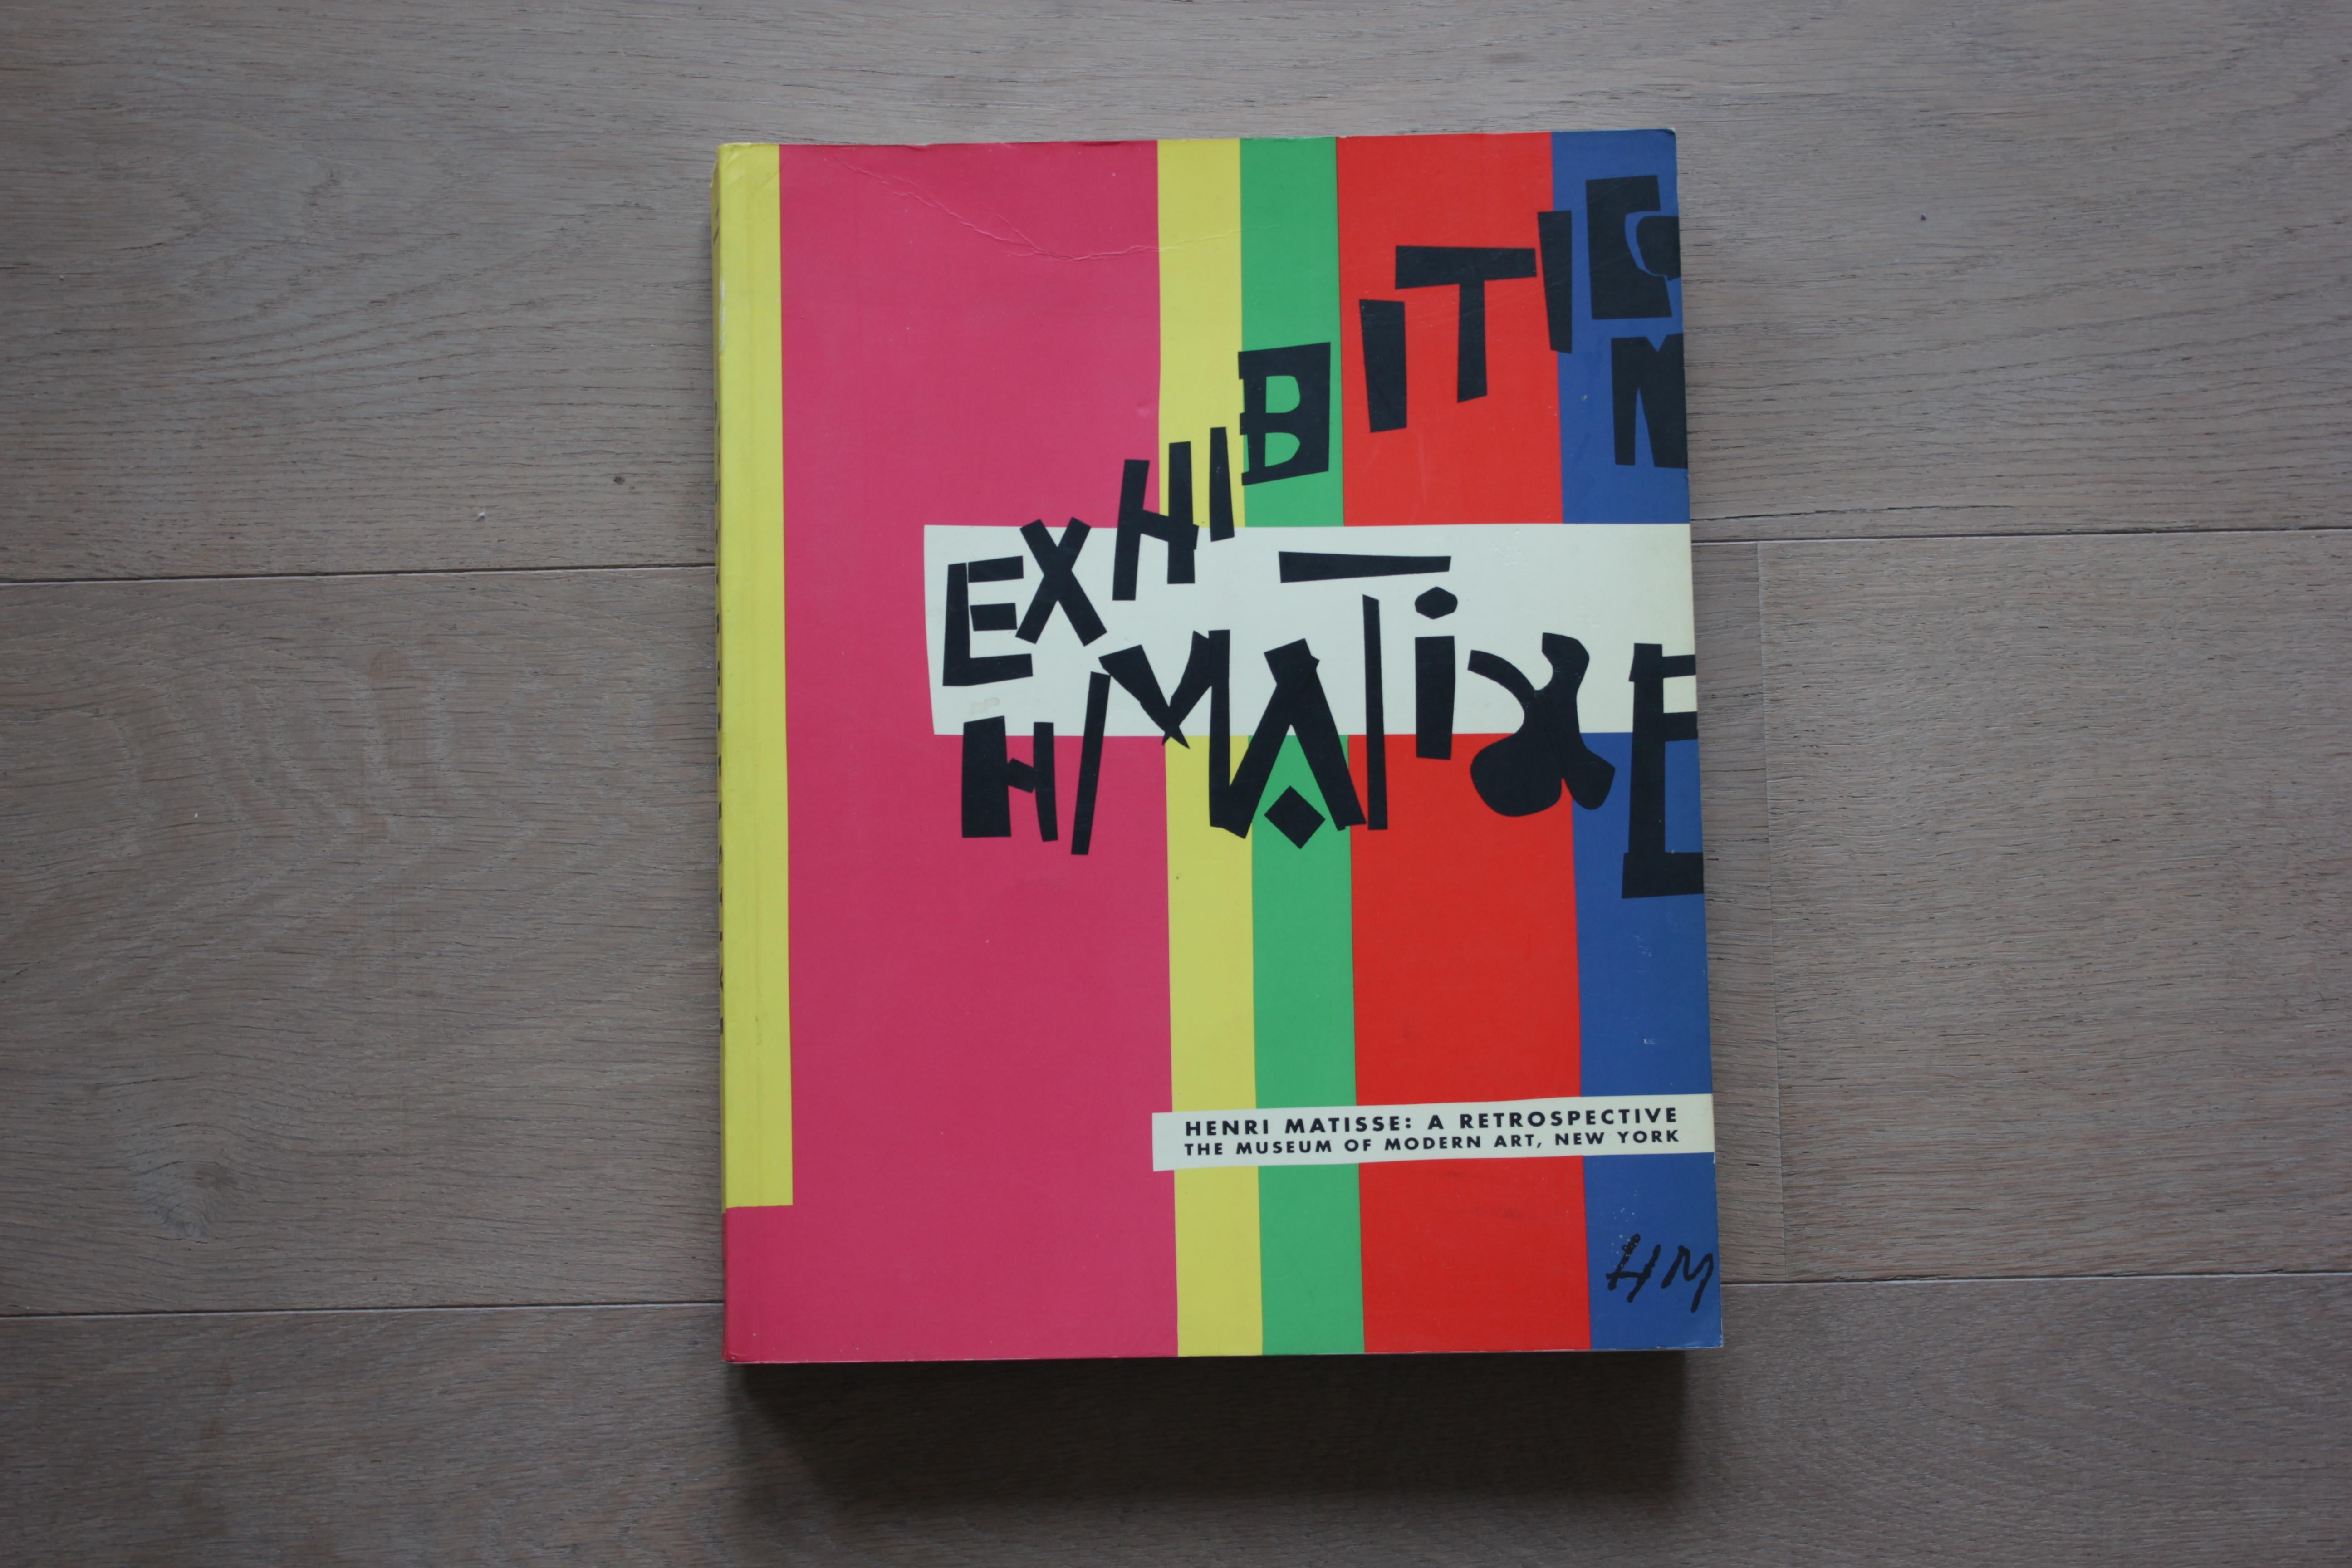 Reproducing more than 400 artworks (320 in color), this hefty catalogue of an exhibition at New York's Museum of Modern Art documents the largest and most ambitious Matisse retrospective ever assembled. In his exciting introductory essay, MoMA